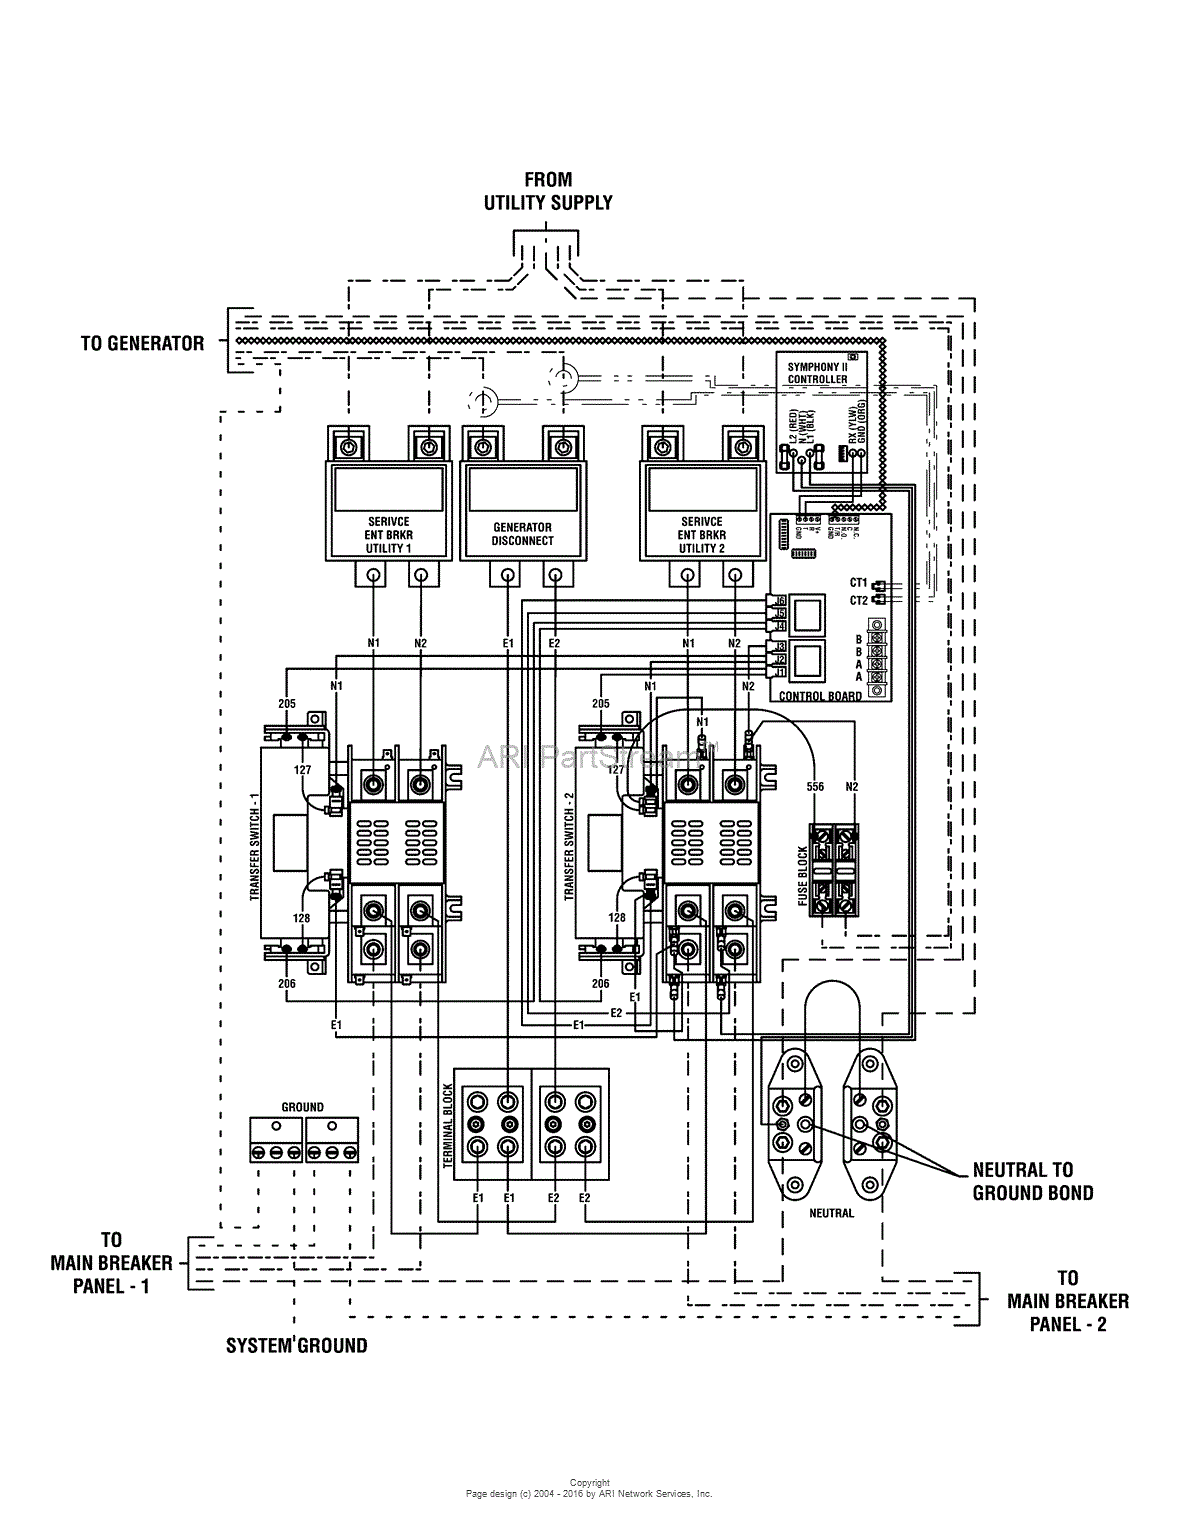 200 Amp Automatic Transfer Switch Wiring Diagram from az417944.vo.msecnd.net